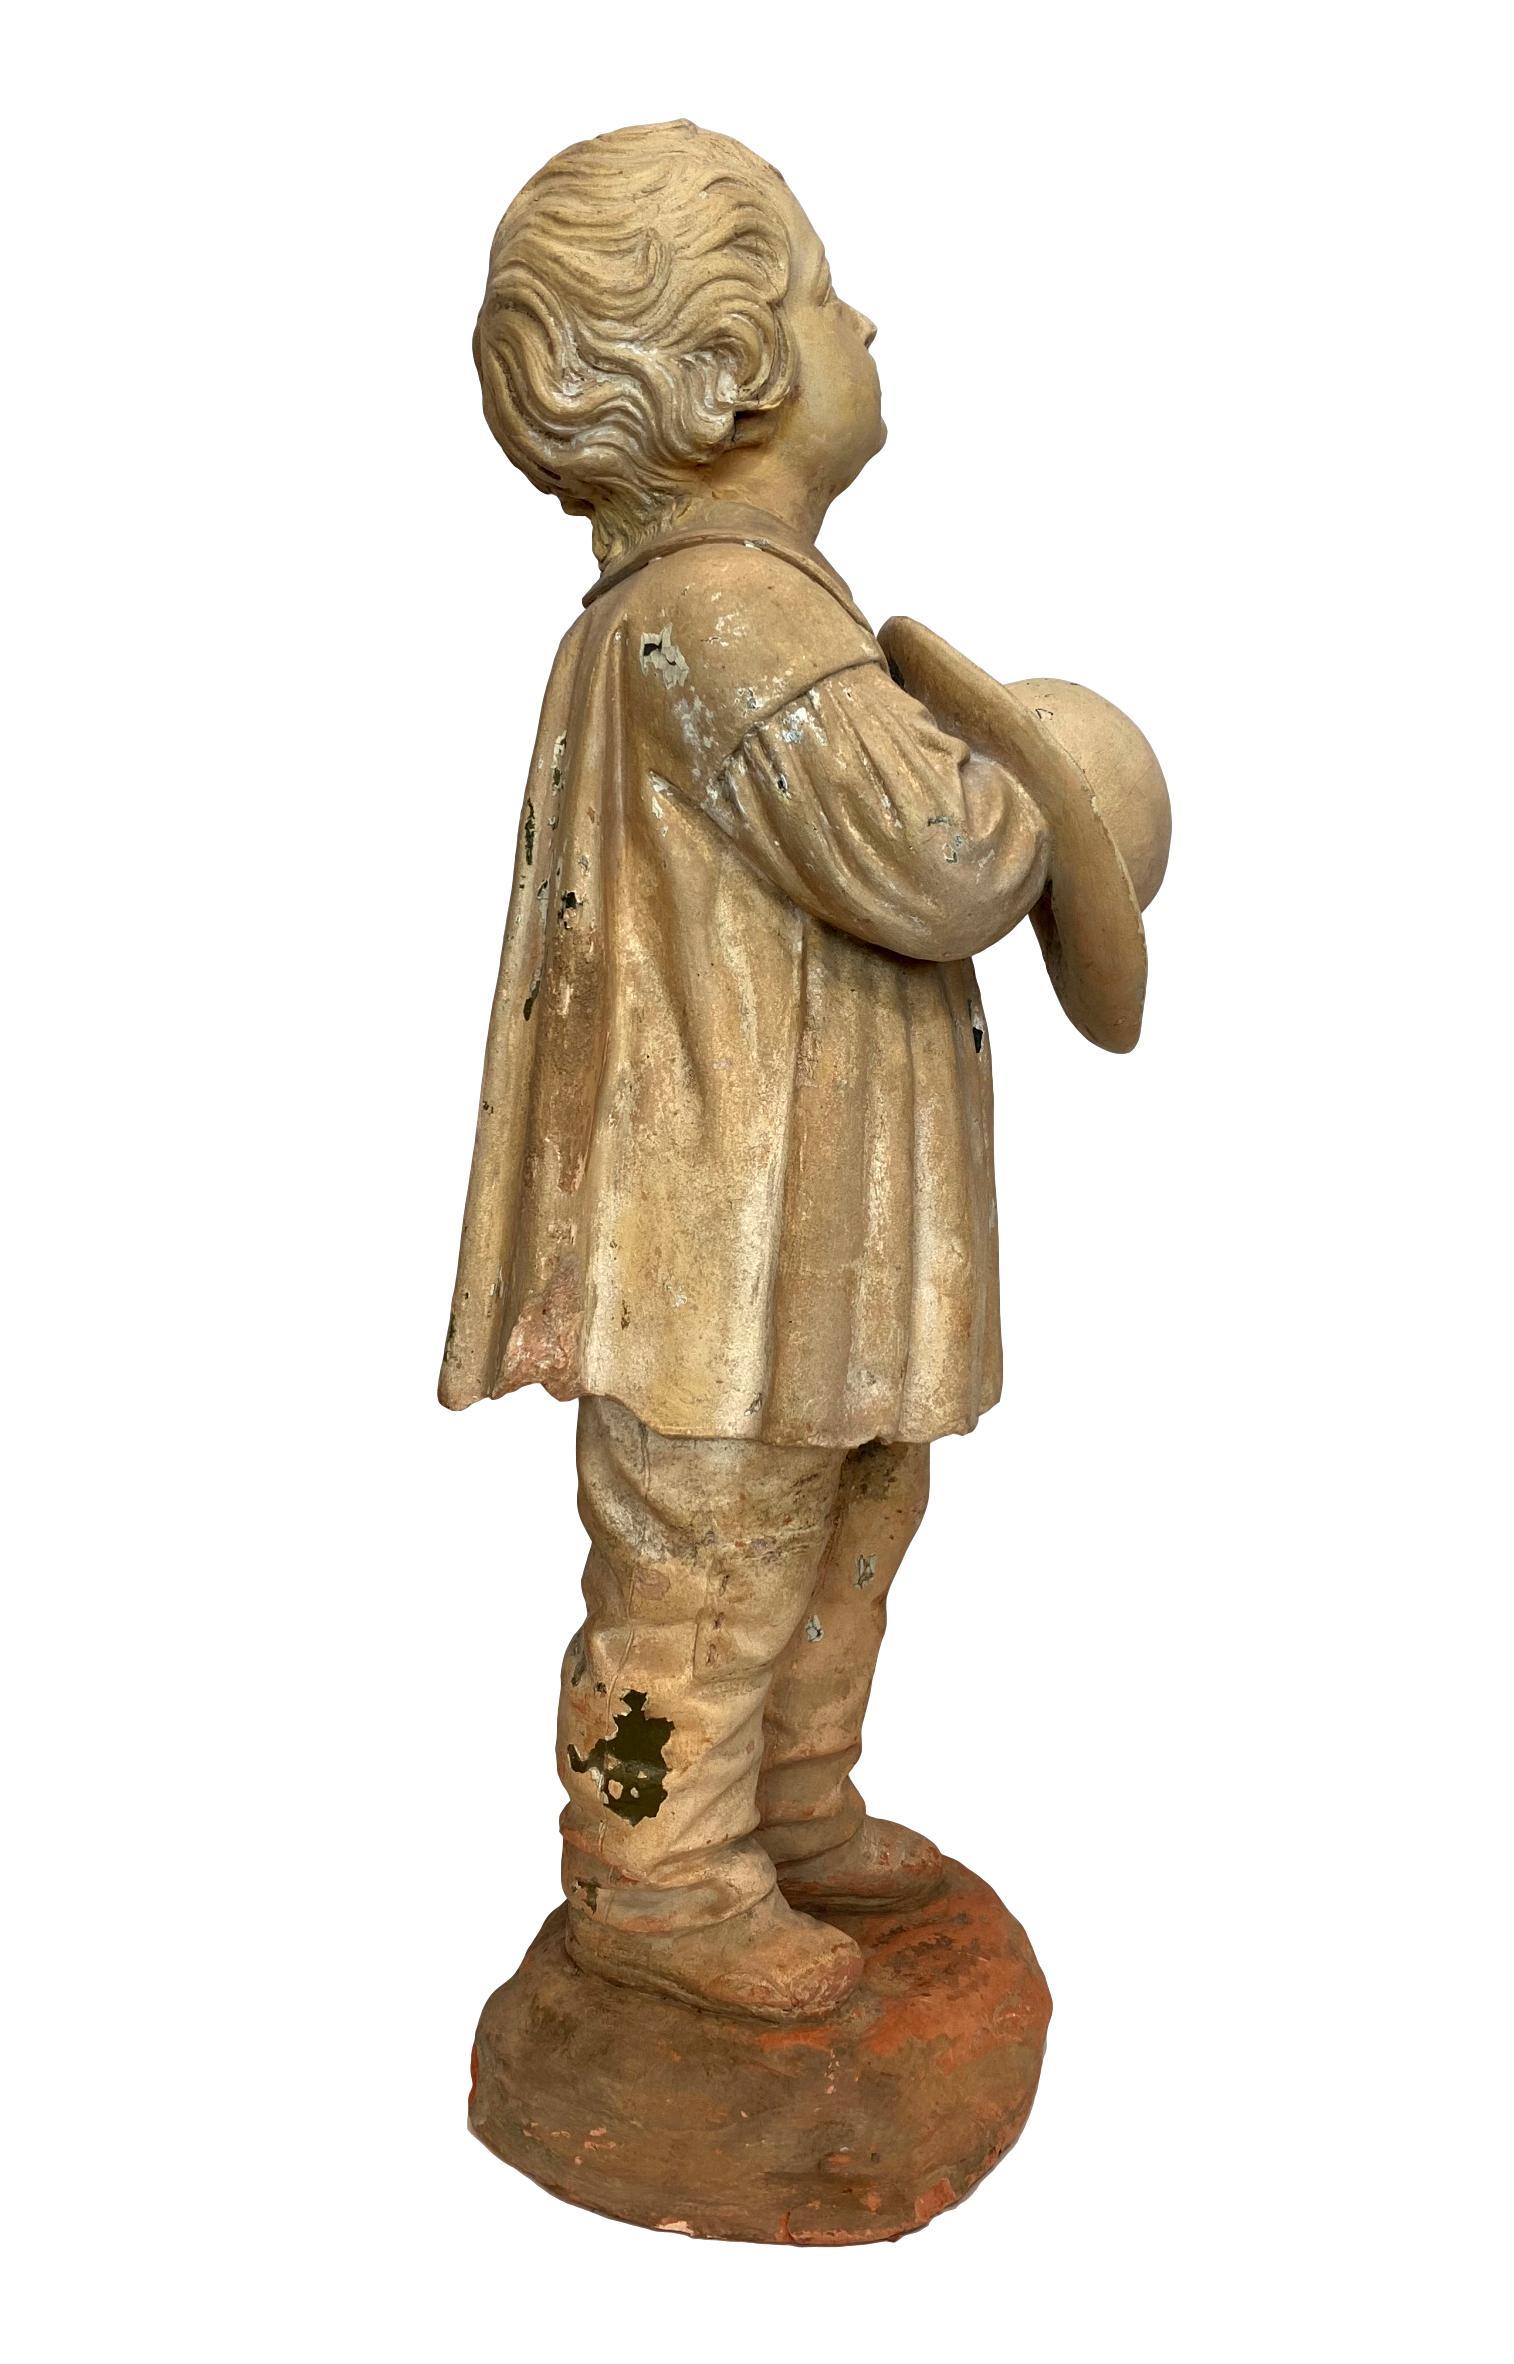 Molded Terra Cotta Figure of a Boy with Hat, French, ca. 1890